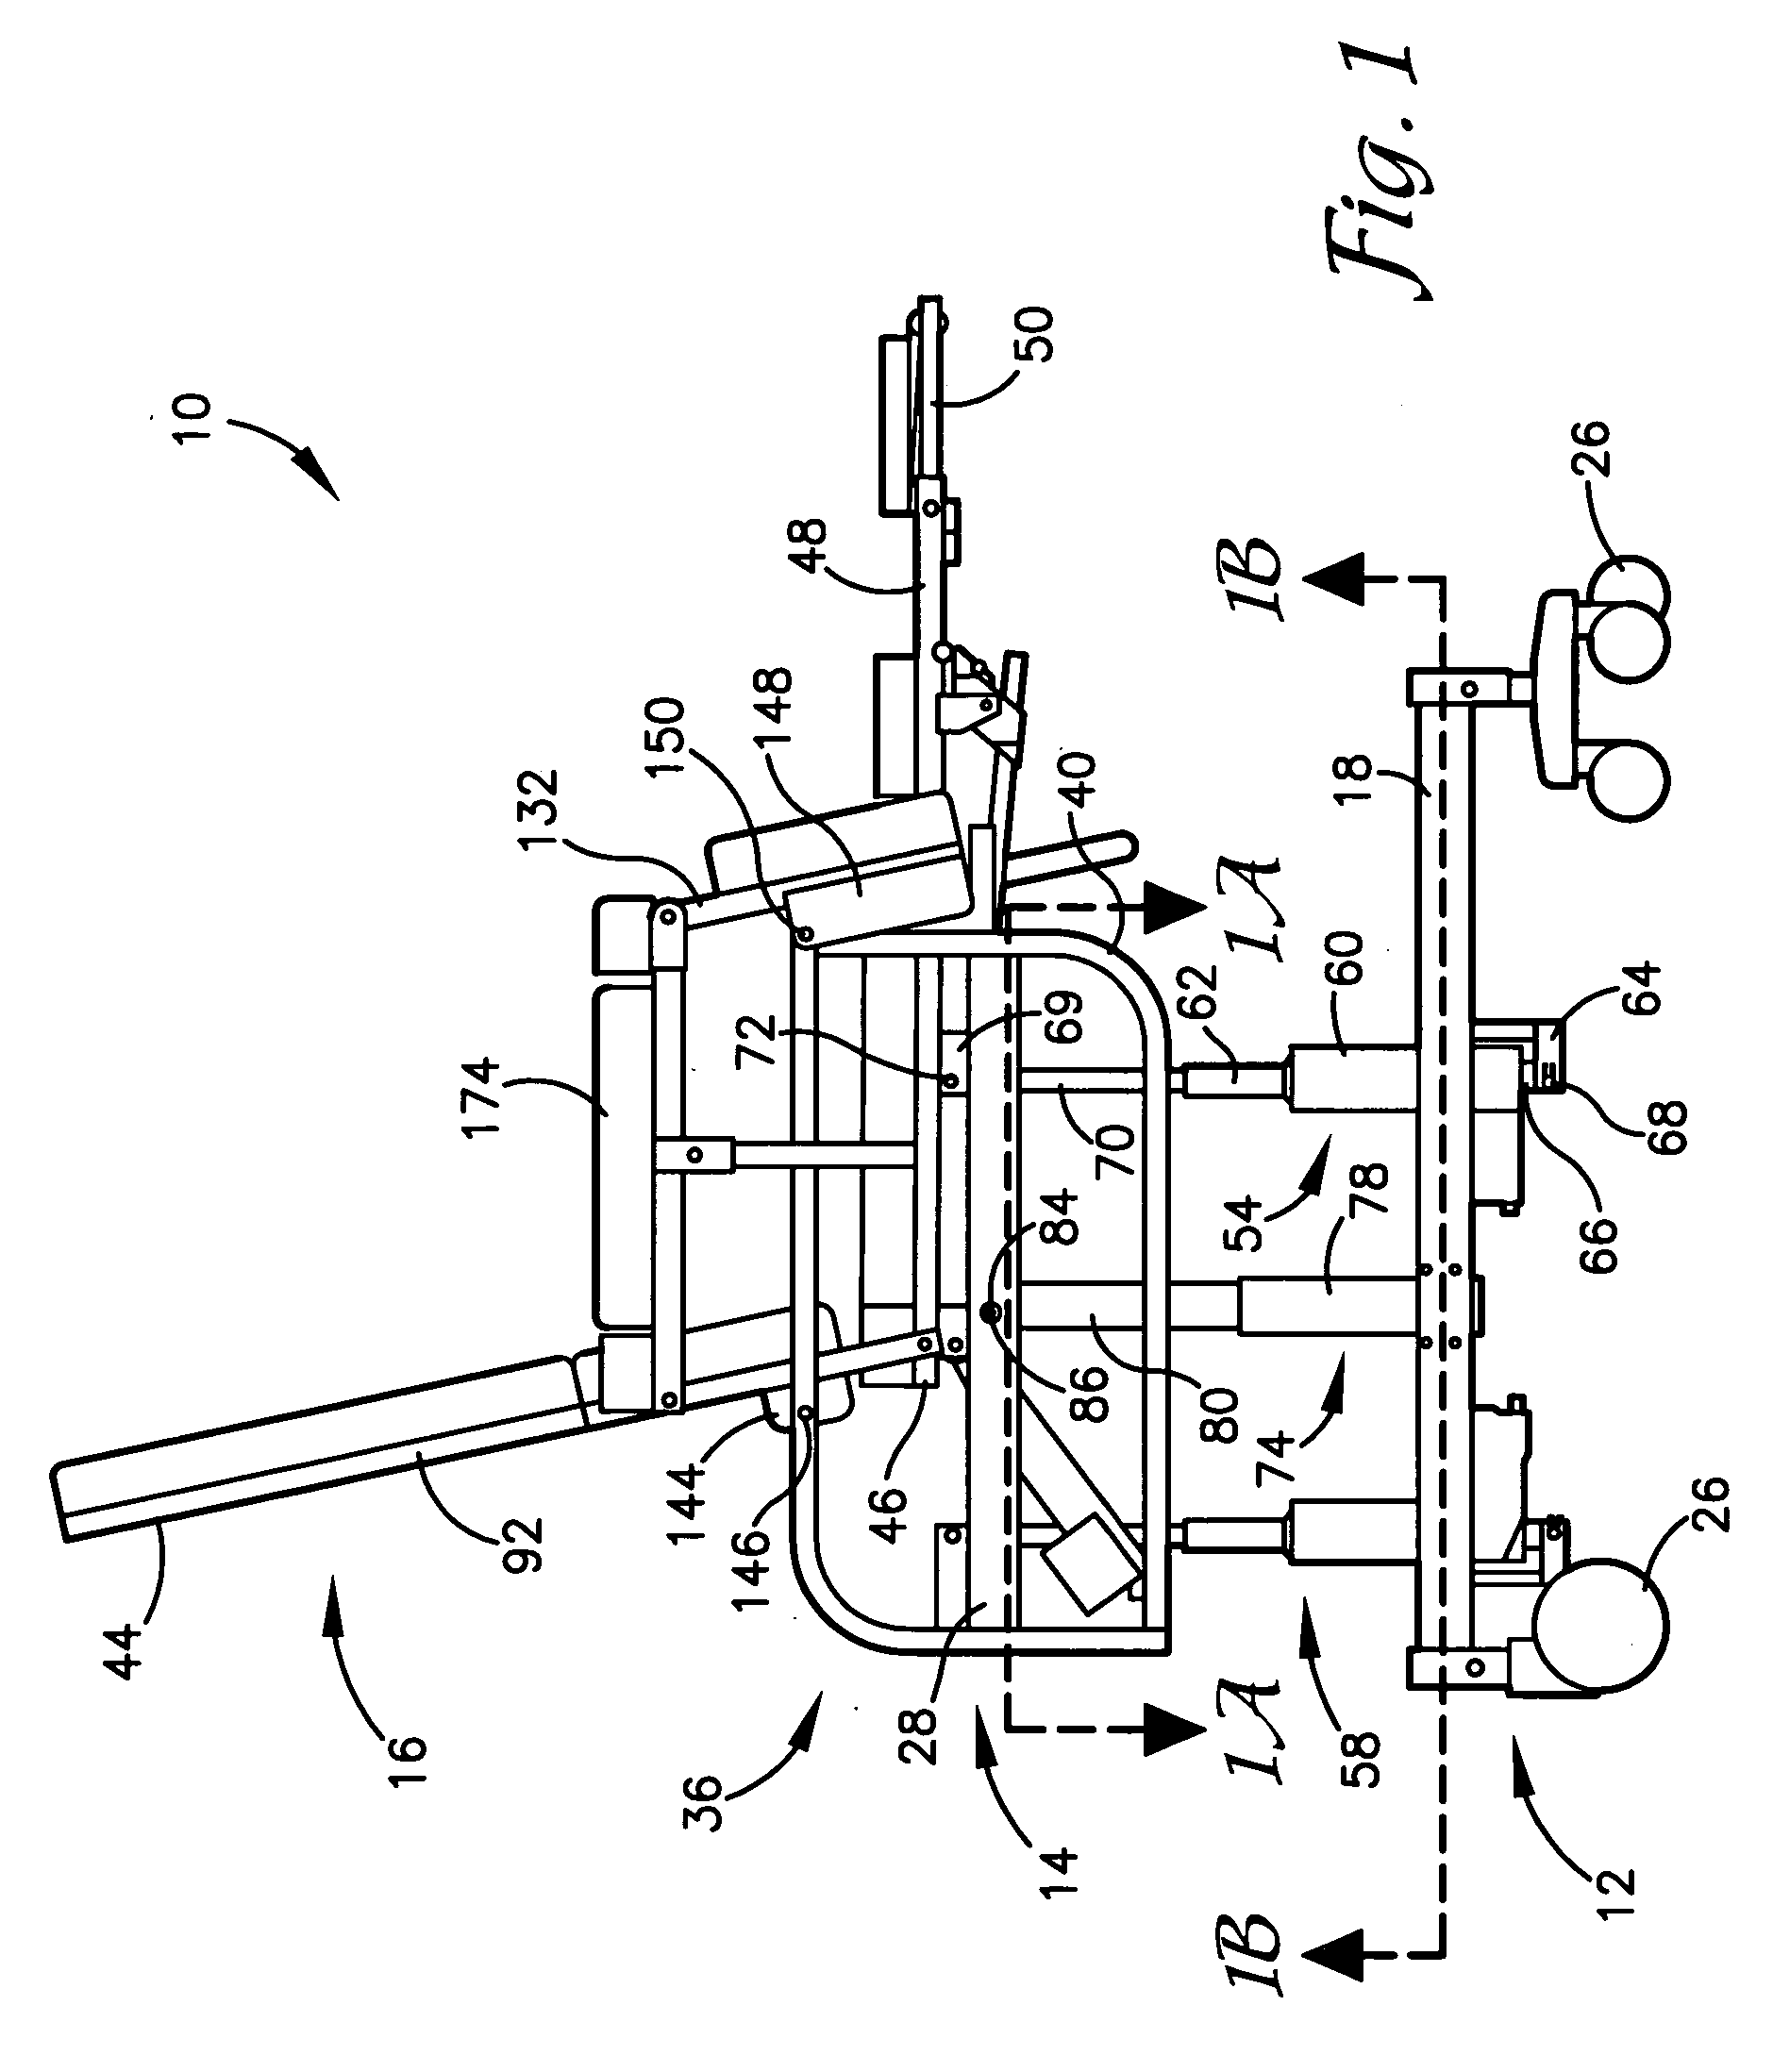 Automated multi-functional support apparatus